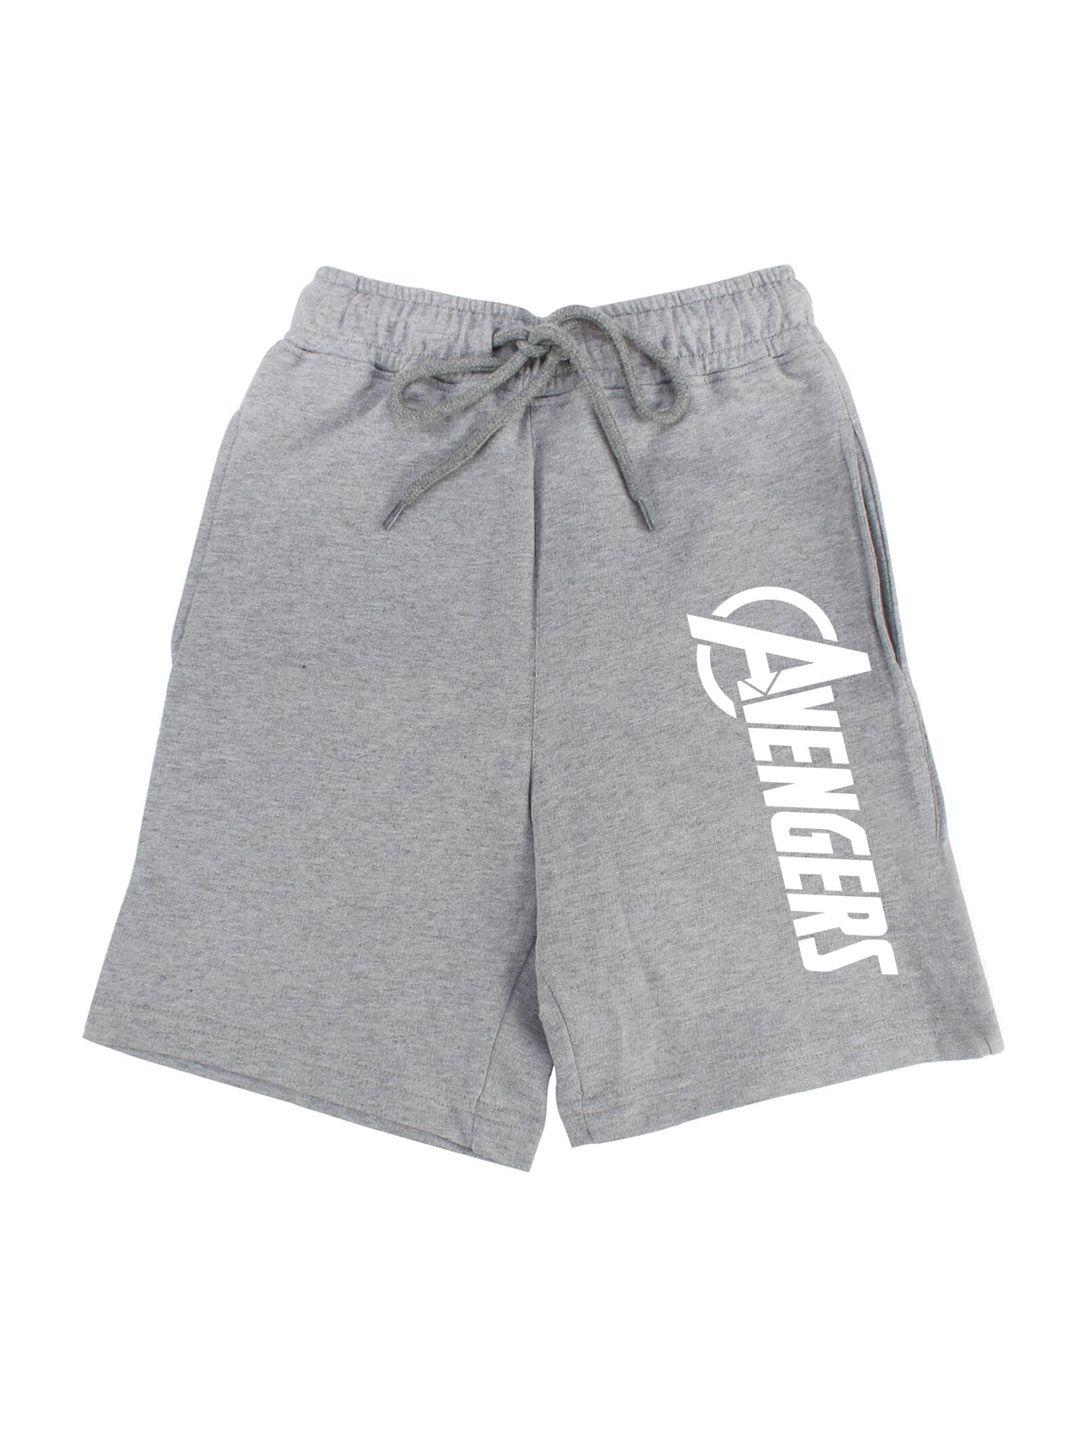 marvel-by-wear-your-mind-boys-grey-avengers-solid-shorts